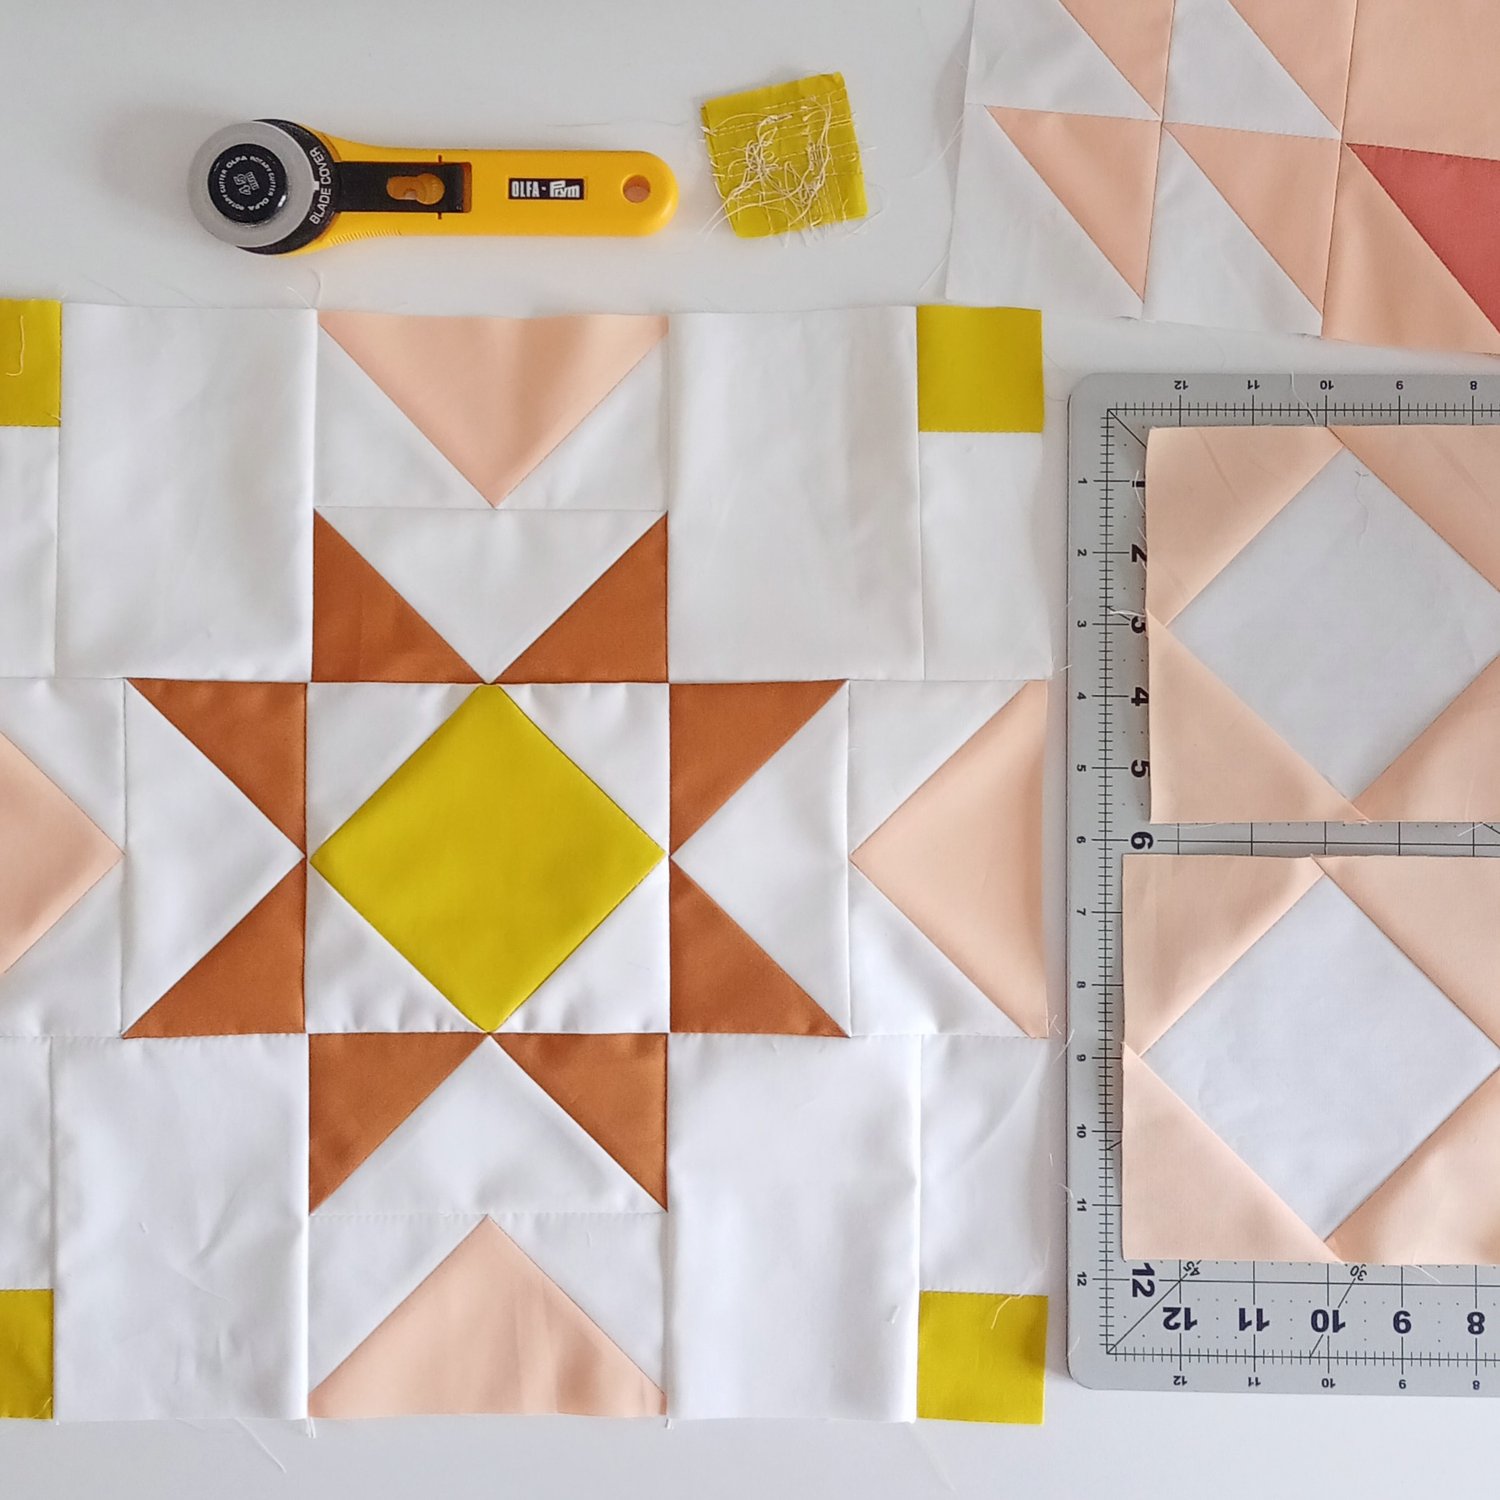 How do you make a square in a square. square in a square quilt block formula